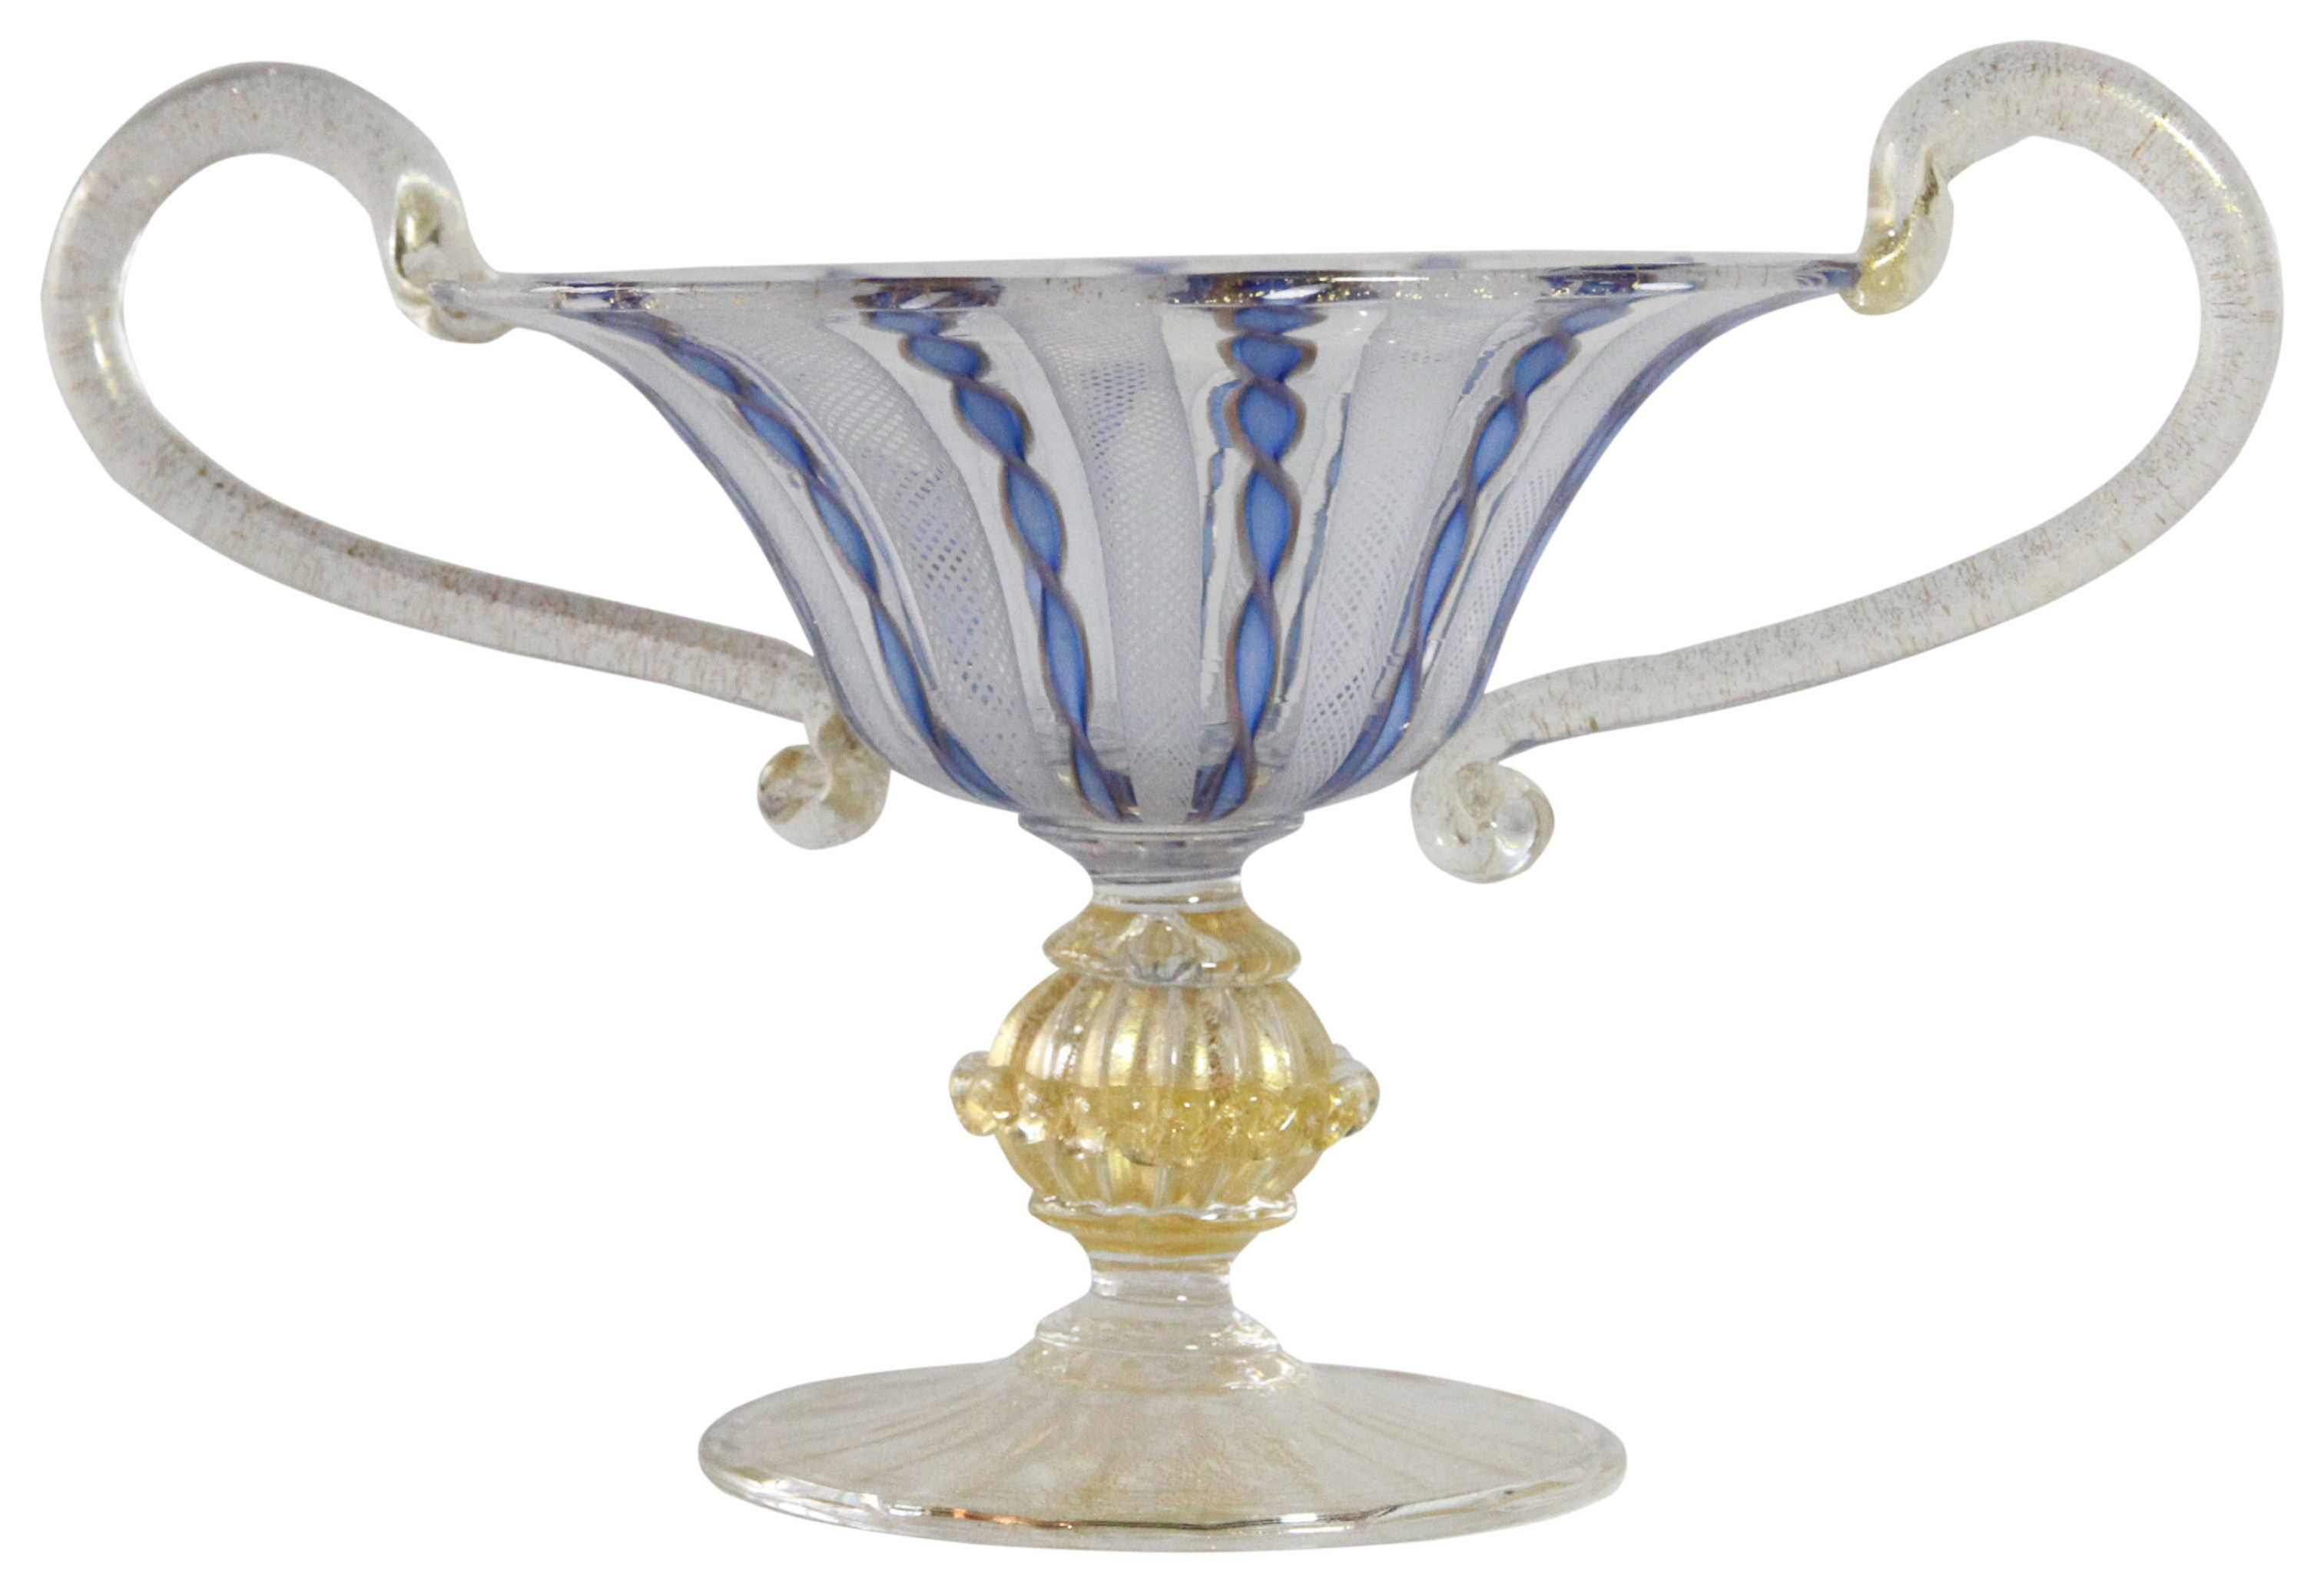 A Venetian suite of decorative desert, bowls & urns decorated in blue & gilt, 15 pieces total, - Image 9 of 12